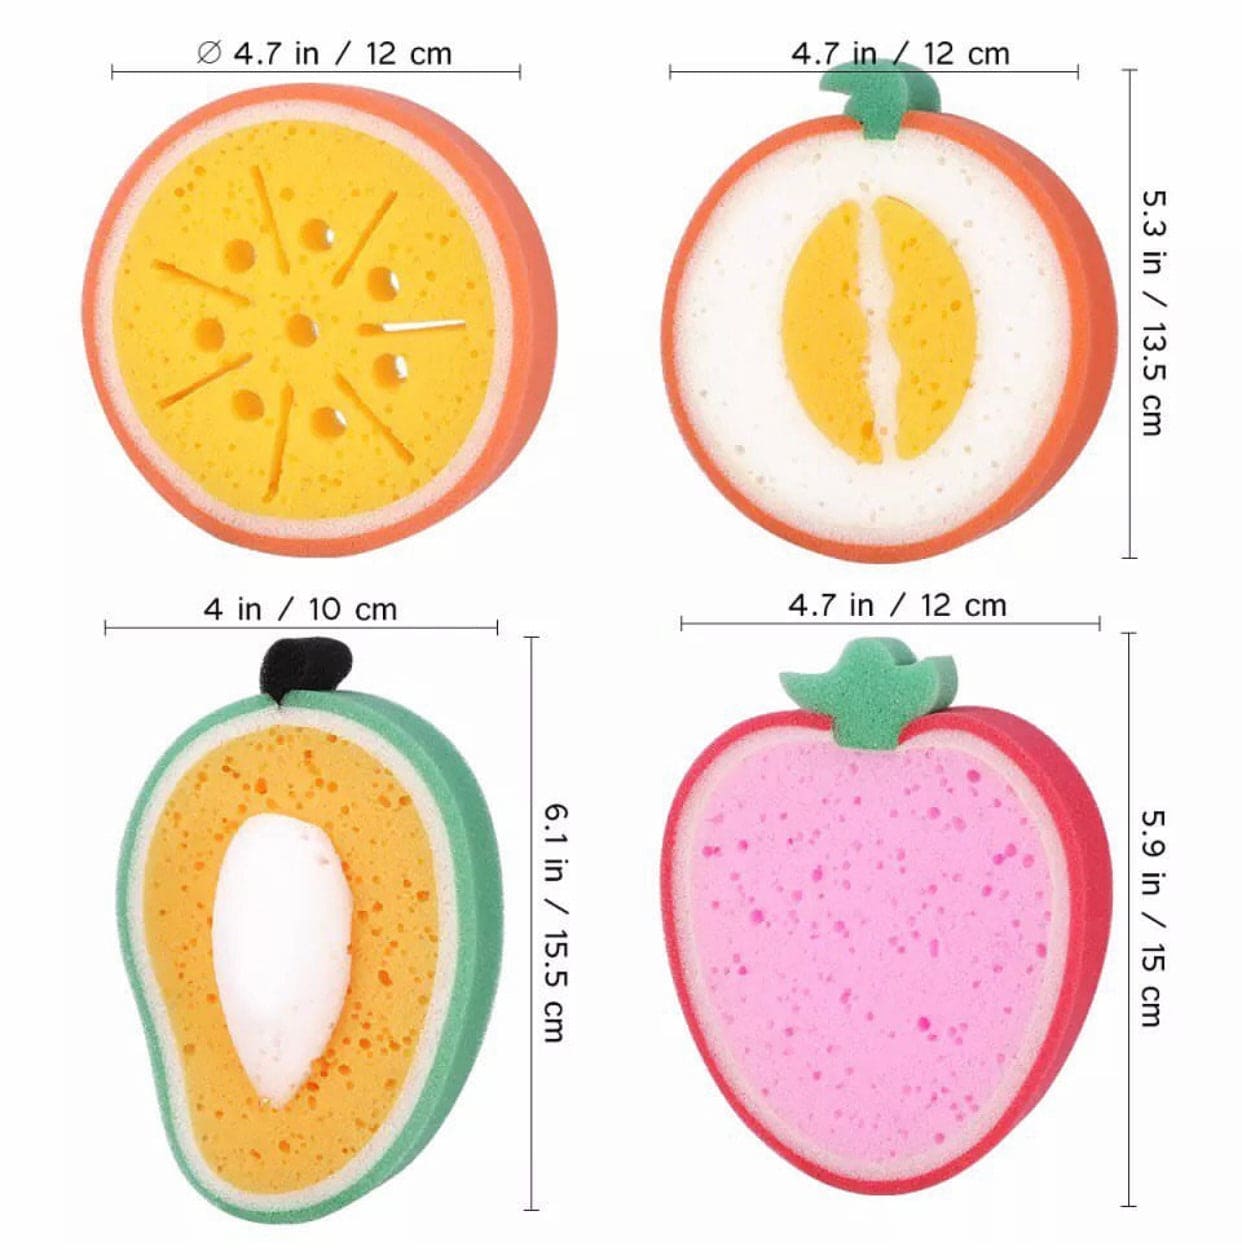 Cute Fruit Shaped Dish Washing And Bath Scrubbing Brush, Kitchen Cleaning Dishcloths For Glass, Fruit Shape Thickening Sponge Scouring Pad